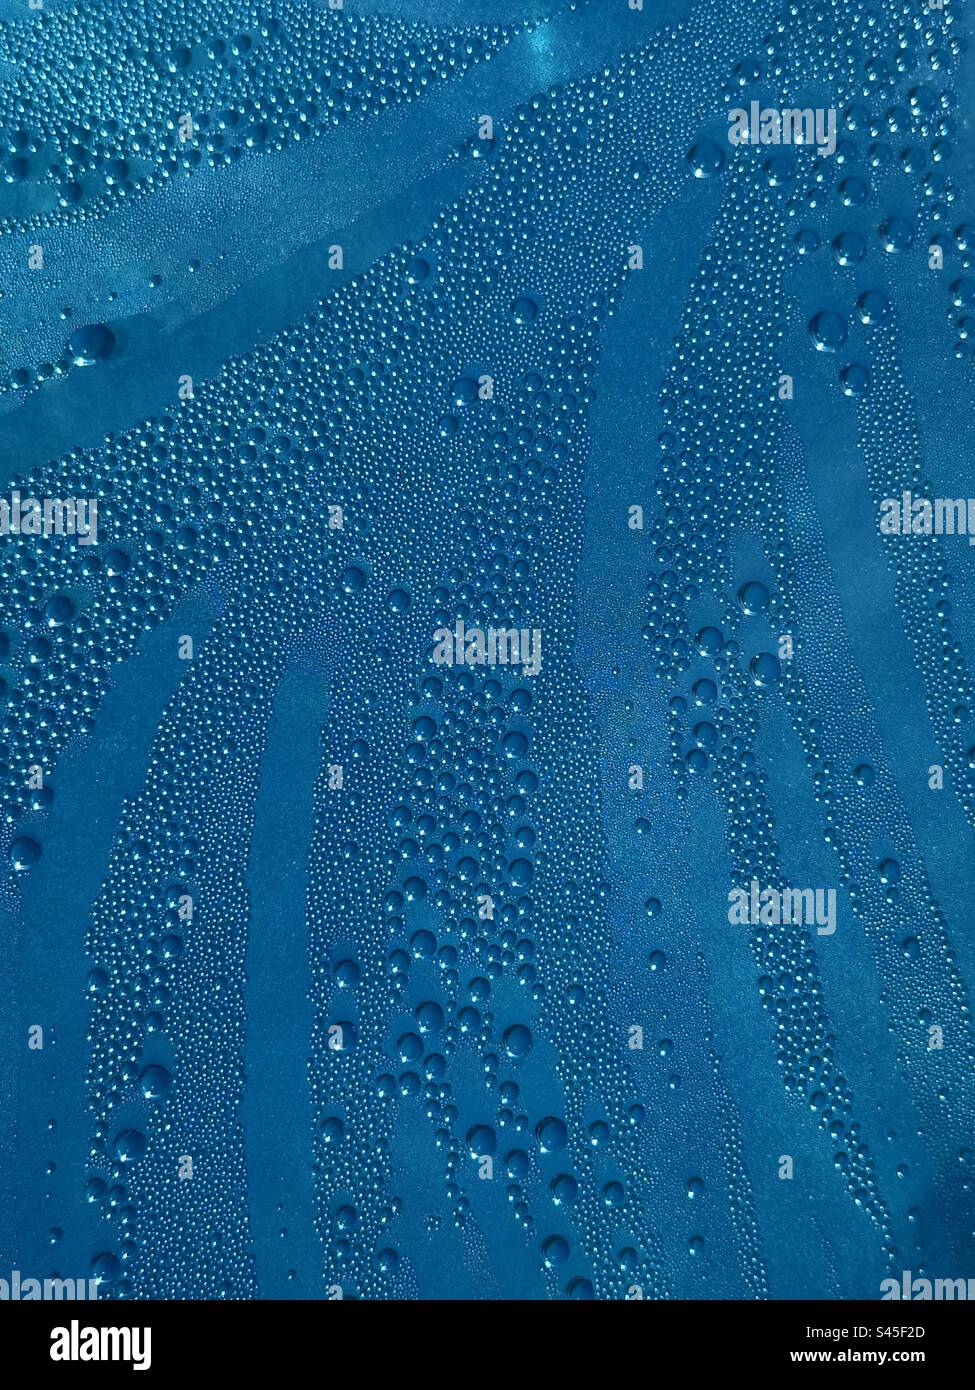 Abstract background of water condensation on blue pool floaty Stock Photo